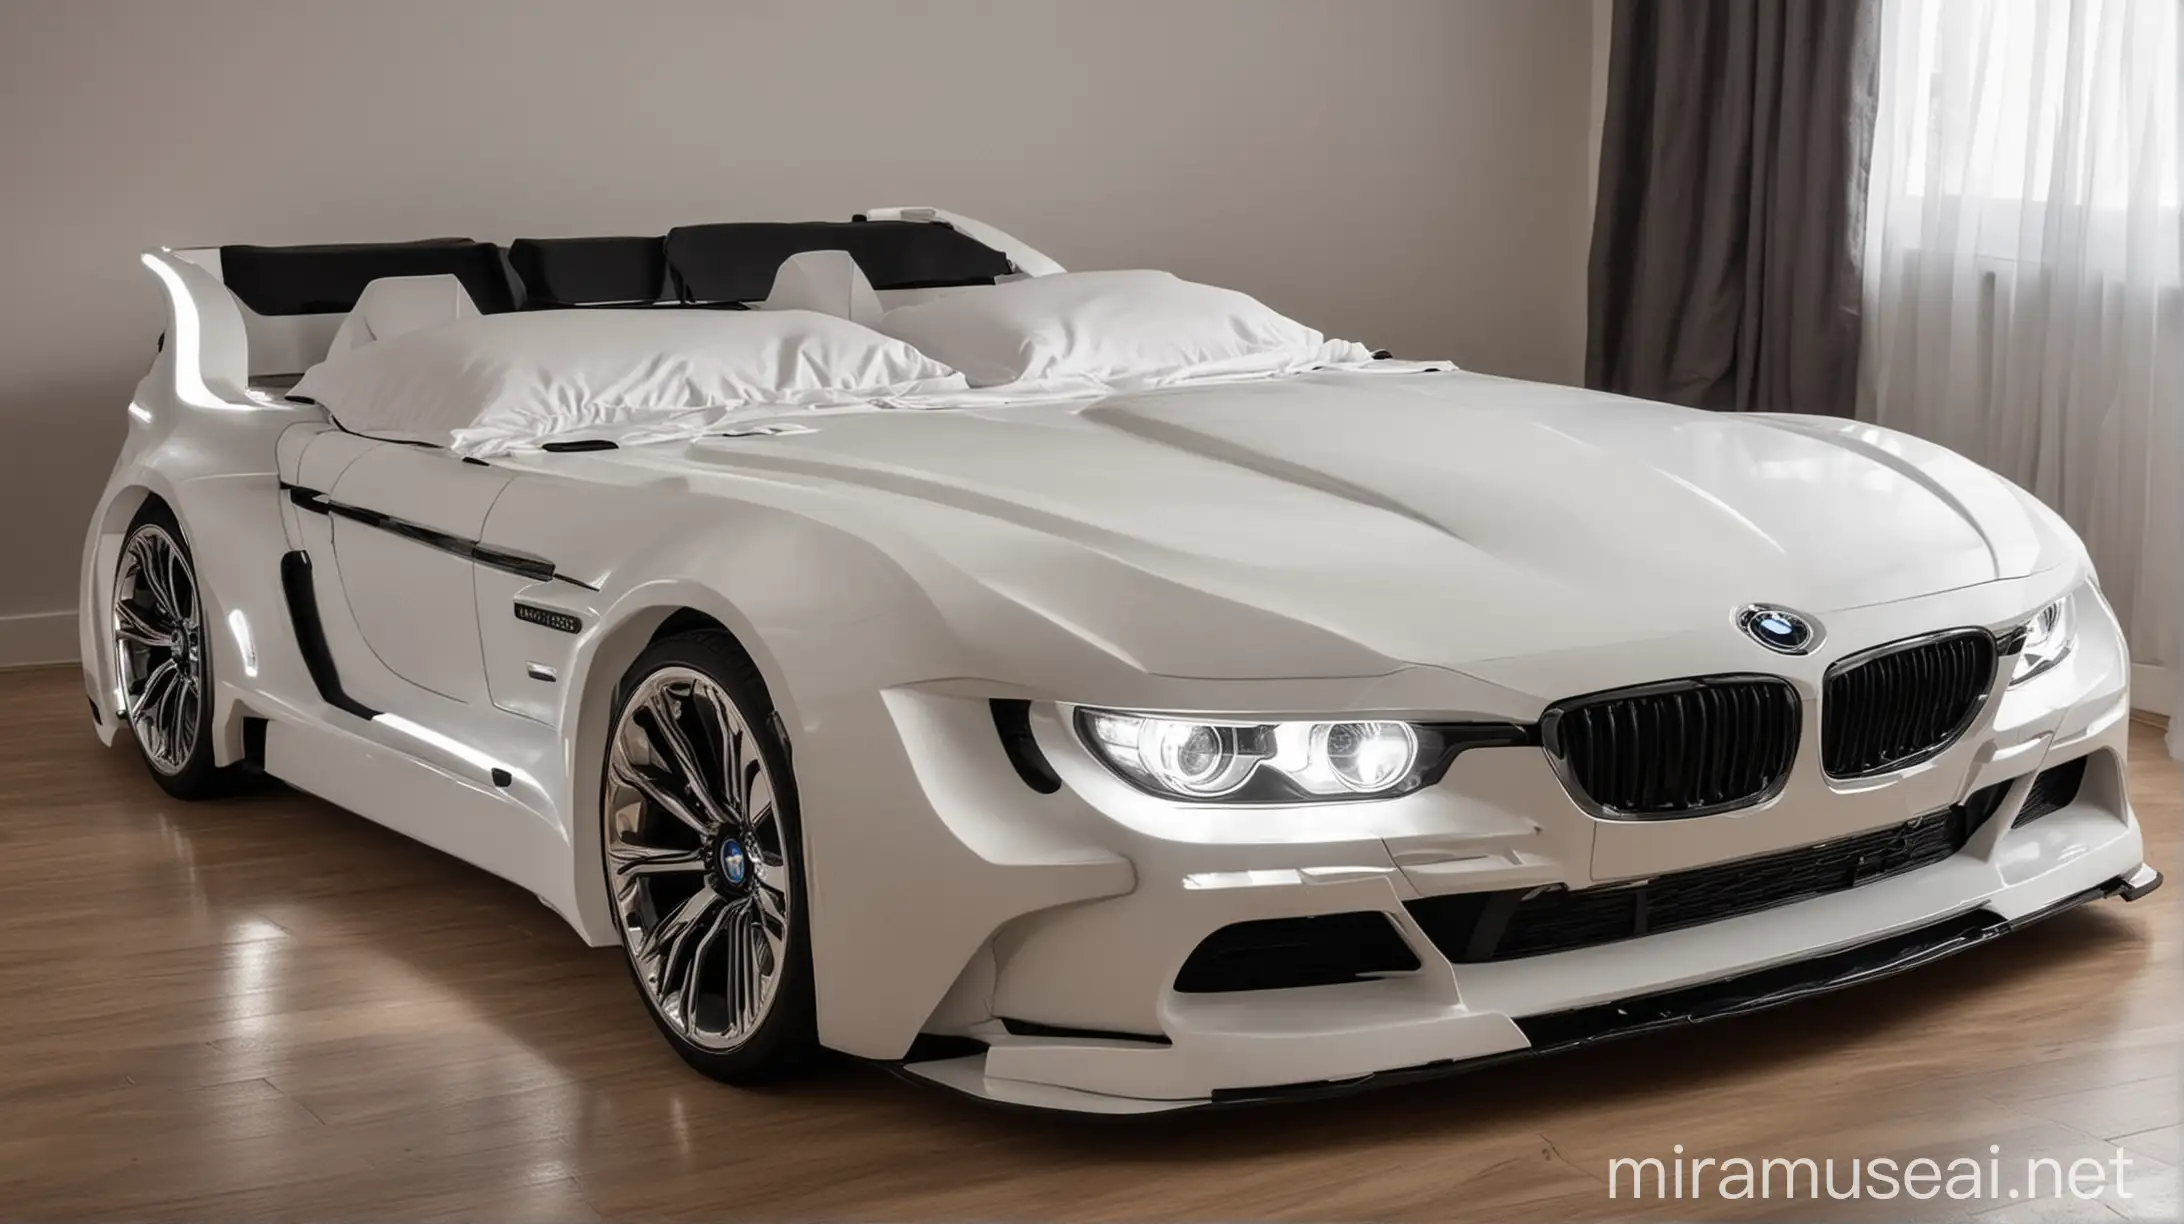 Luxurious BMW Car Bed with Illuminated Headlights